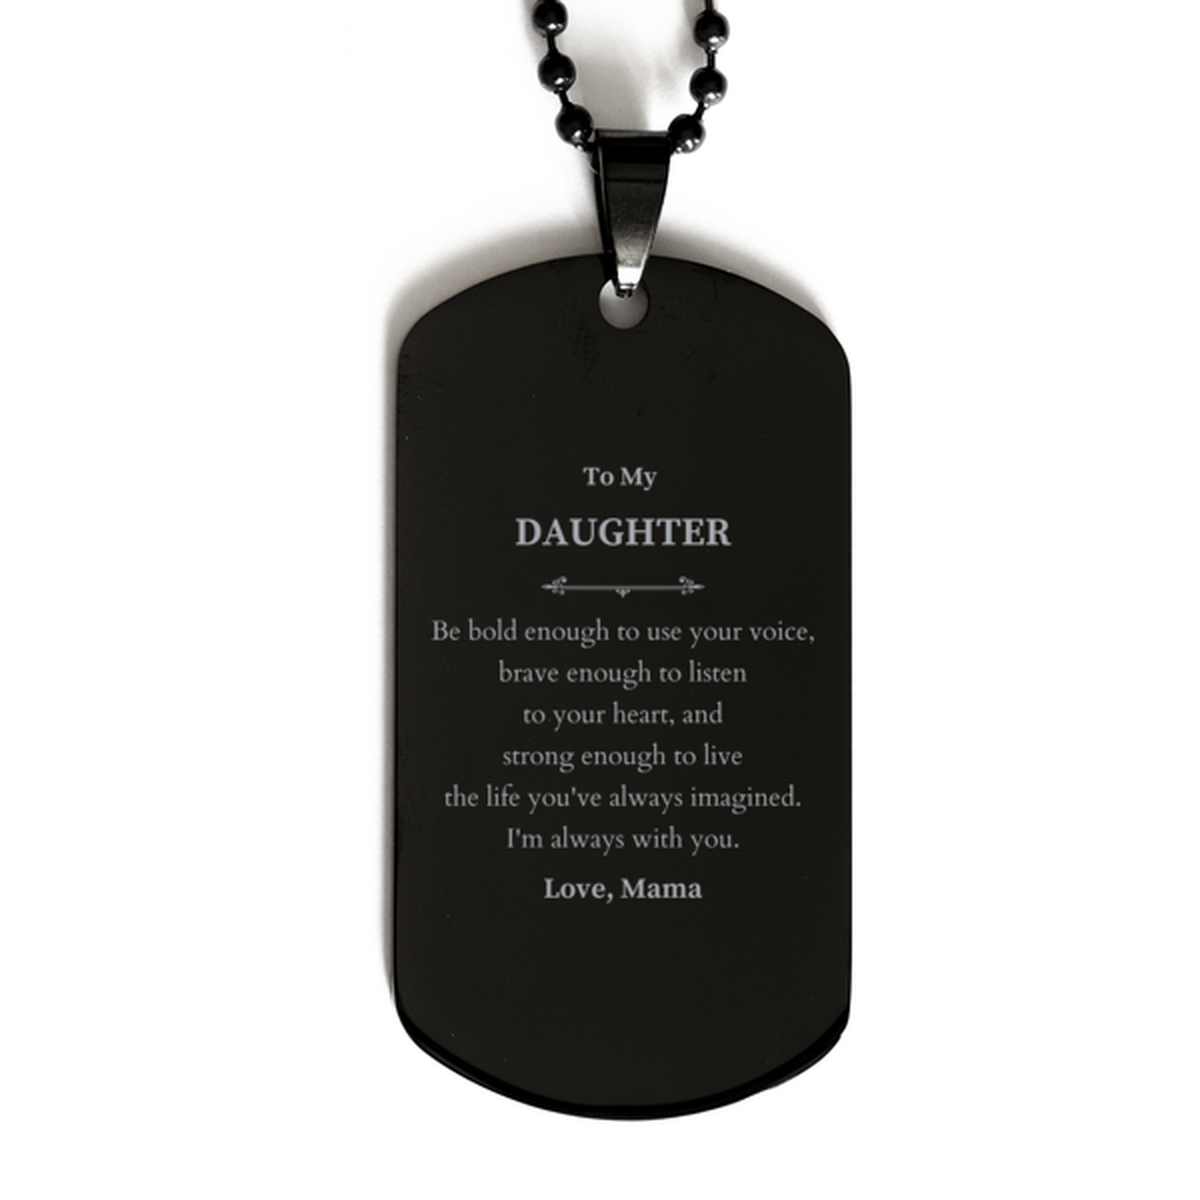 Keepsake Daughter Black Dog Tag Gift Idea Graduation Christmas Birthday Daughter from Mama, Daughter Be bold enough to use your voice, brave enough to listen to your heart. Love, Mama